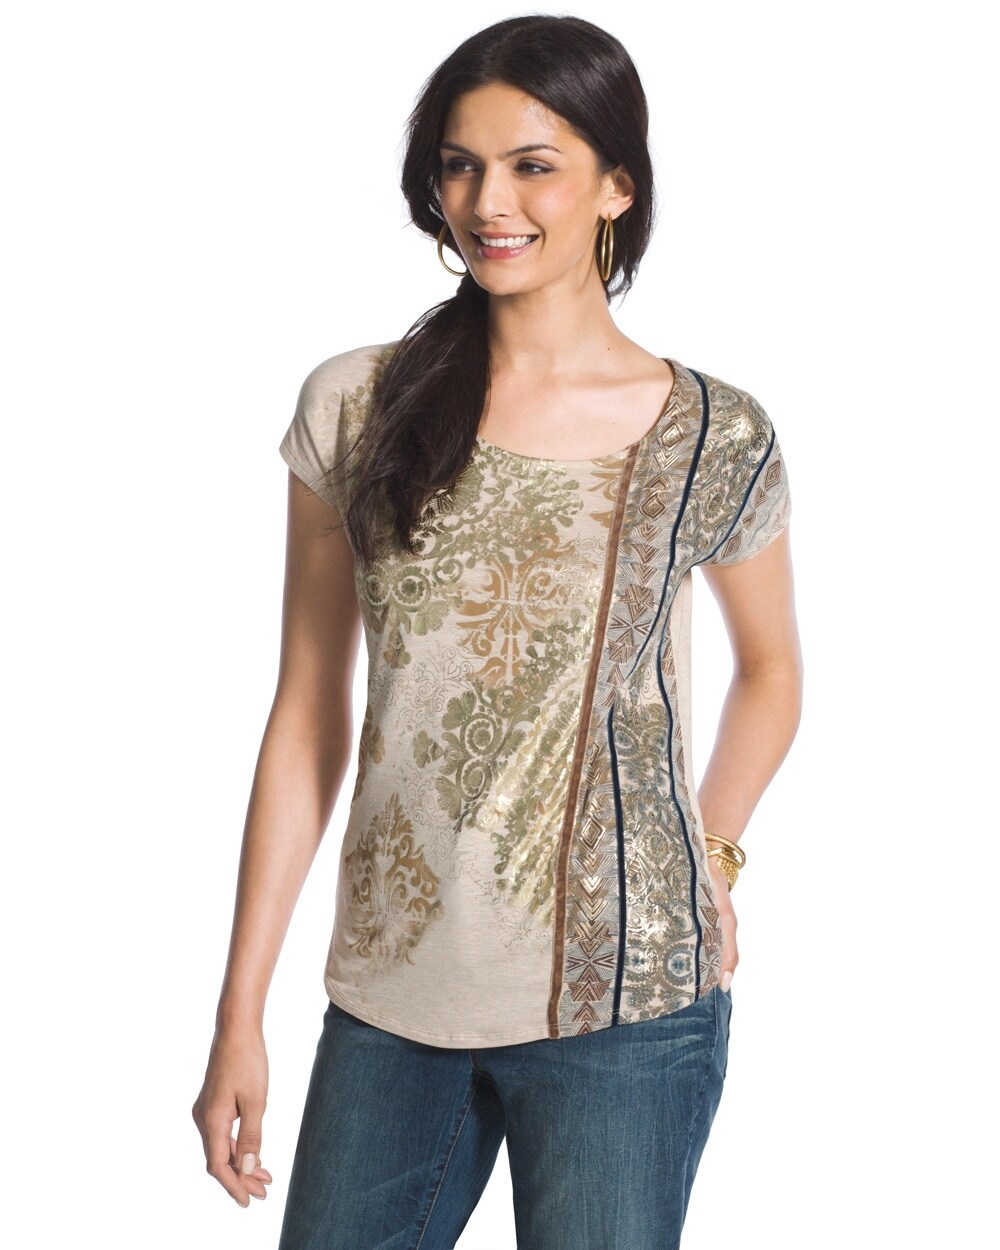 Stamped Medallions Silvia Top